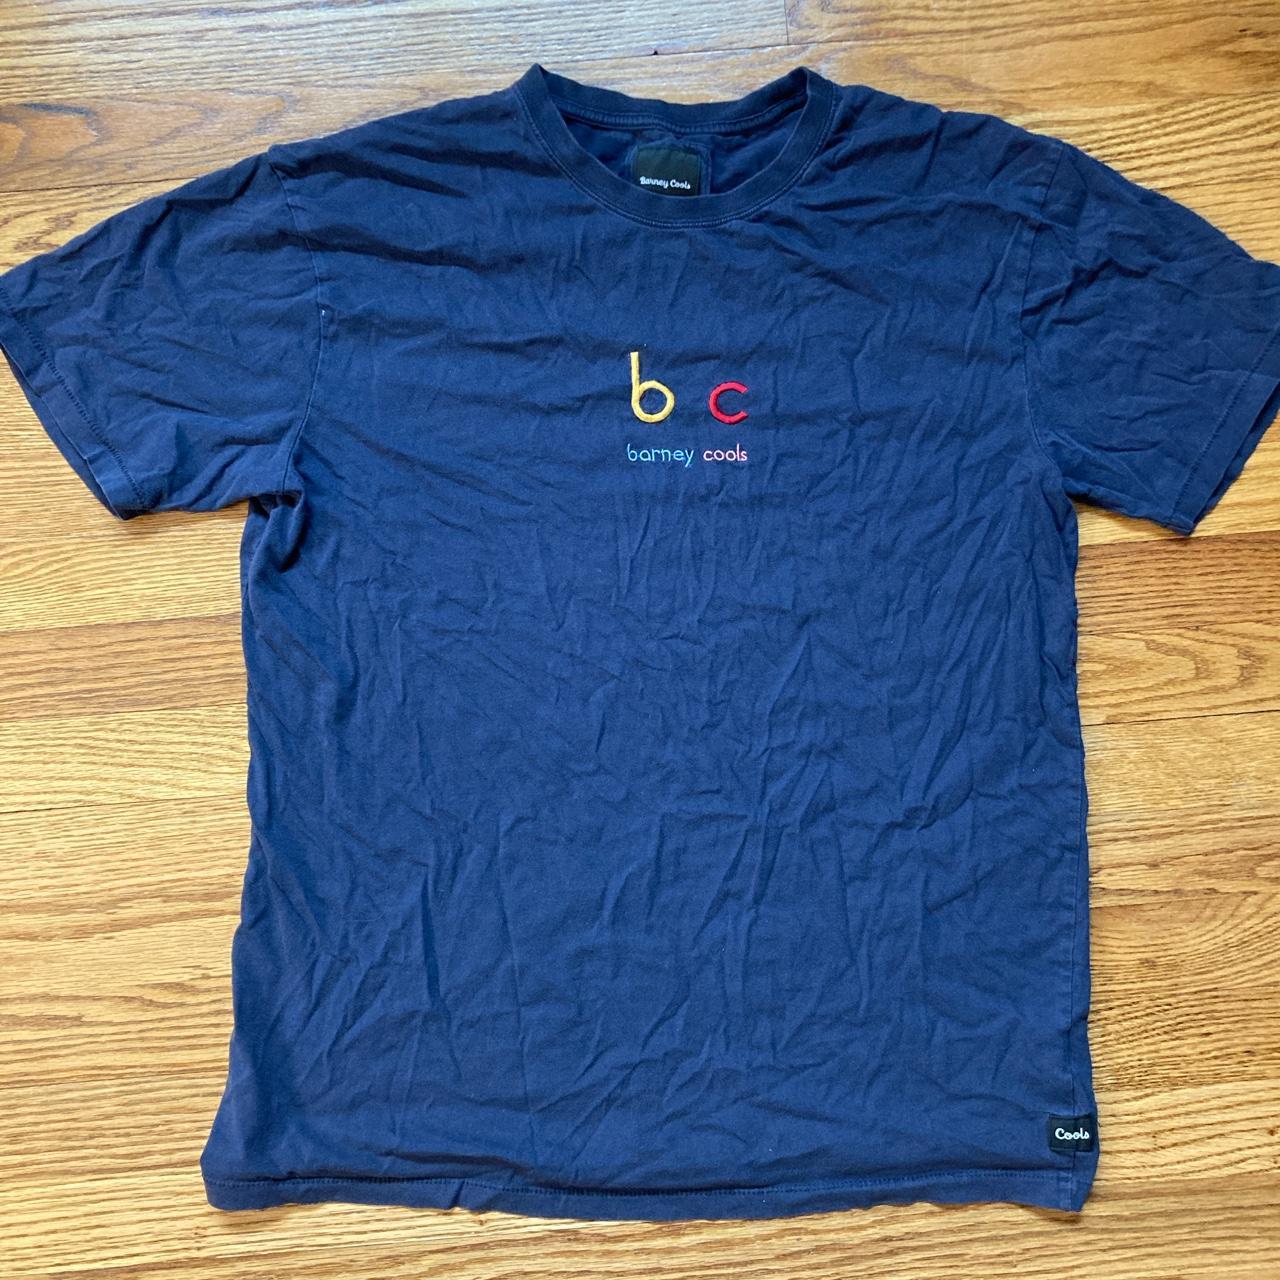 Barney Cools Men's Navy and Blue T-shirt